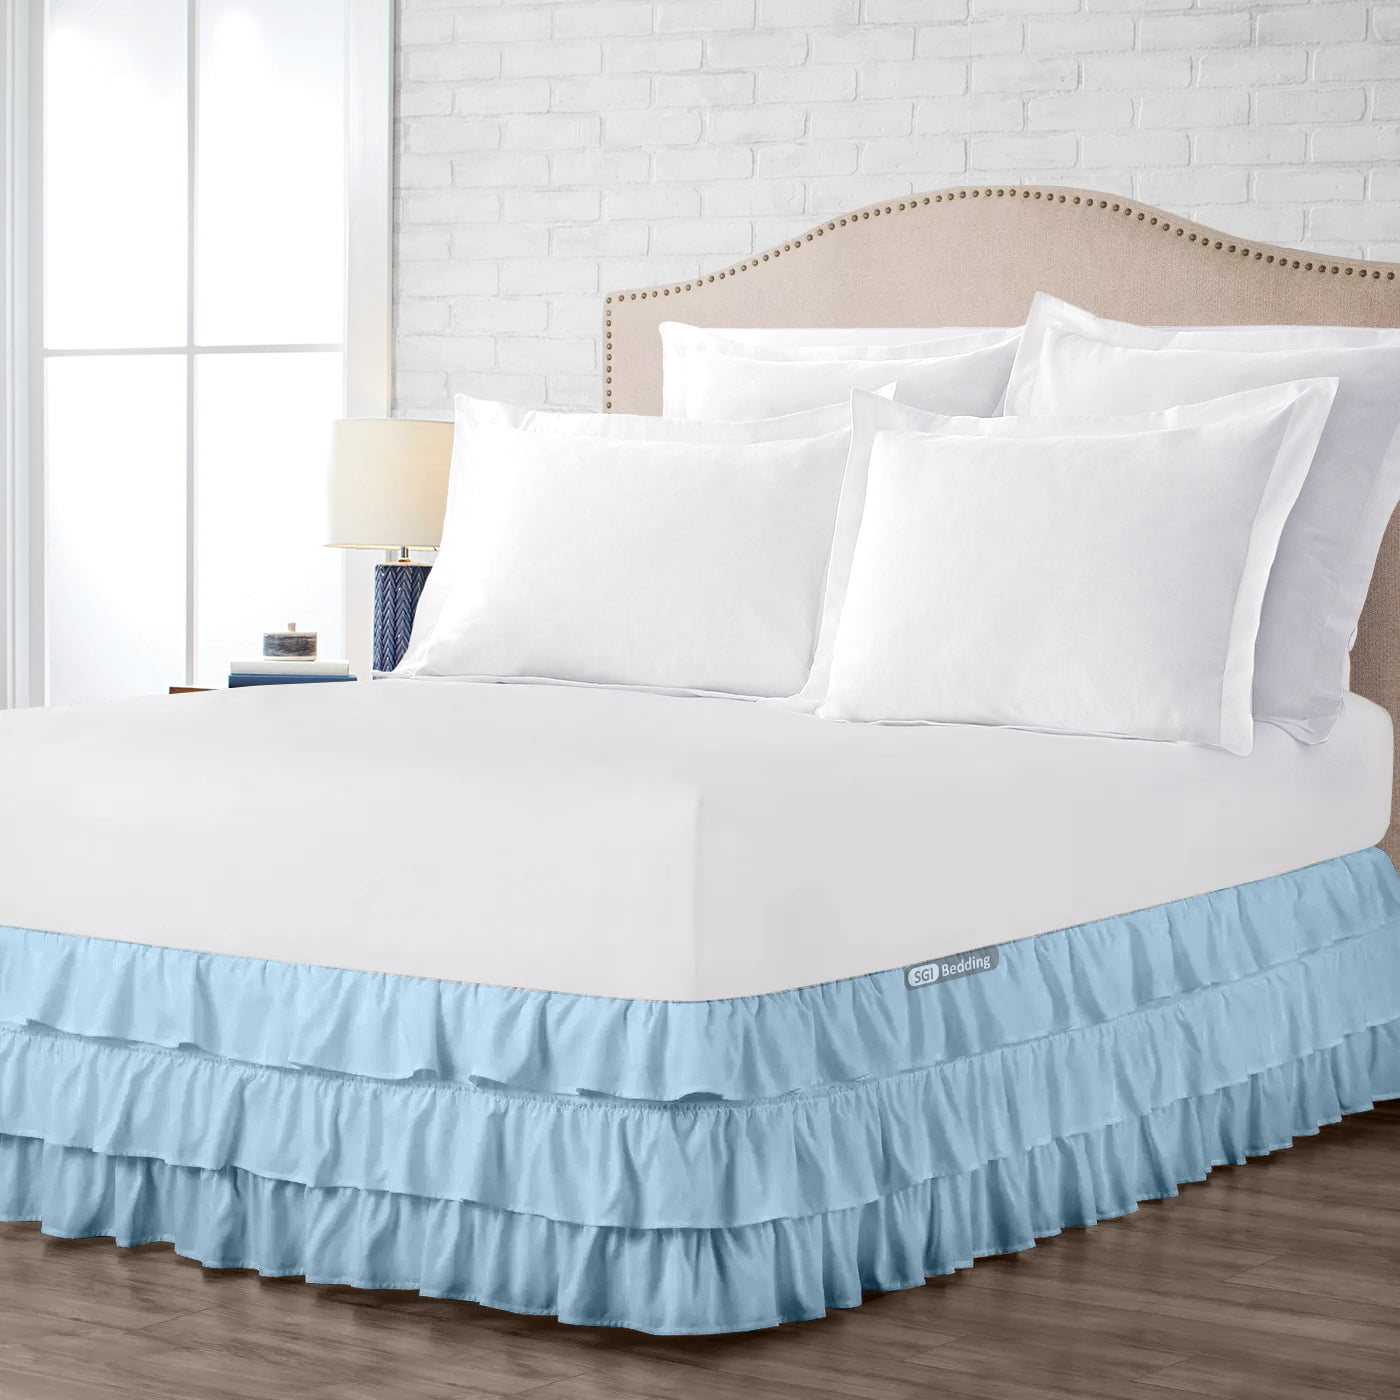 Dust Ruffle Bed Skirt/Bed Cover with pillowsham 30" drop 800 TC Egyptian Cotton 